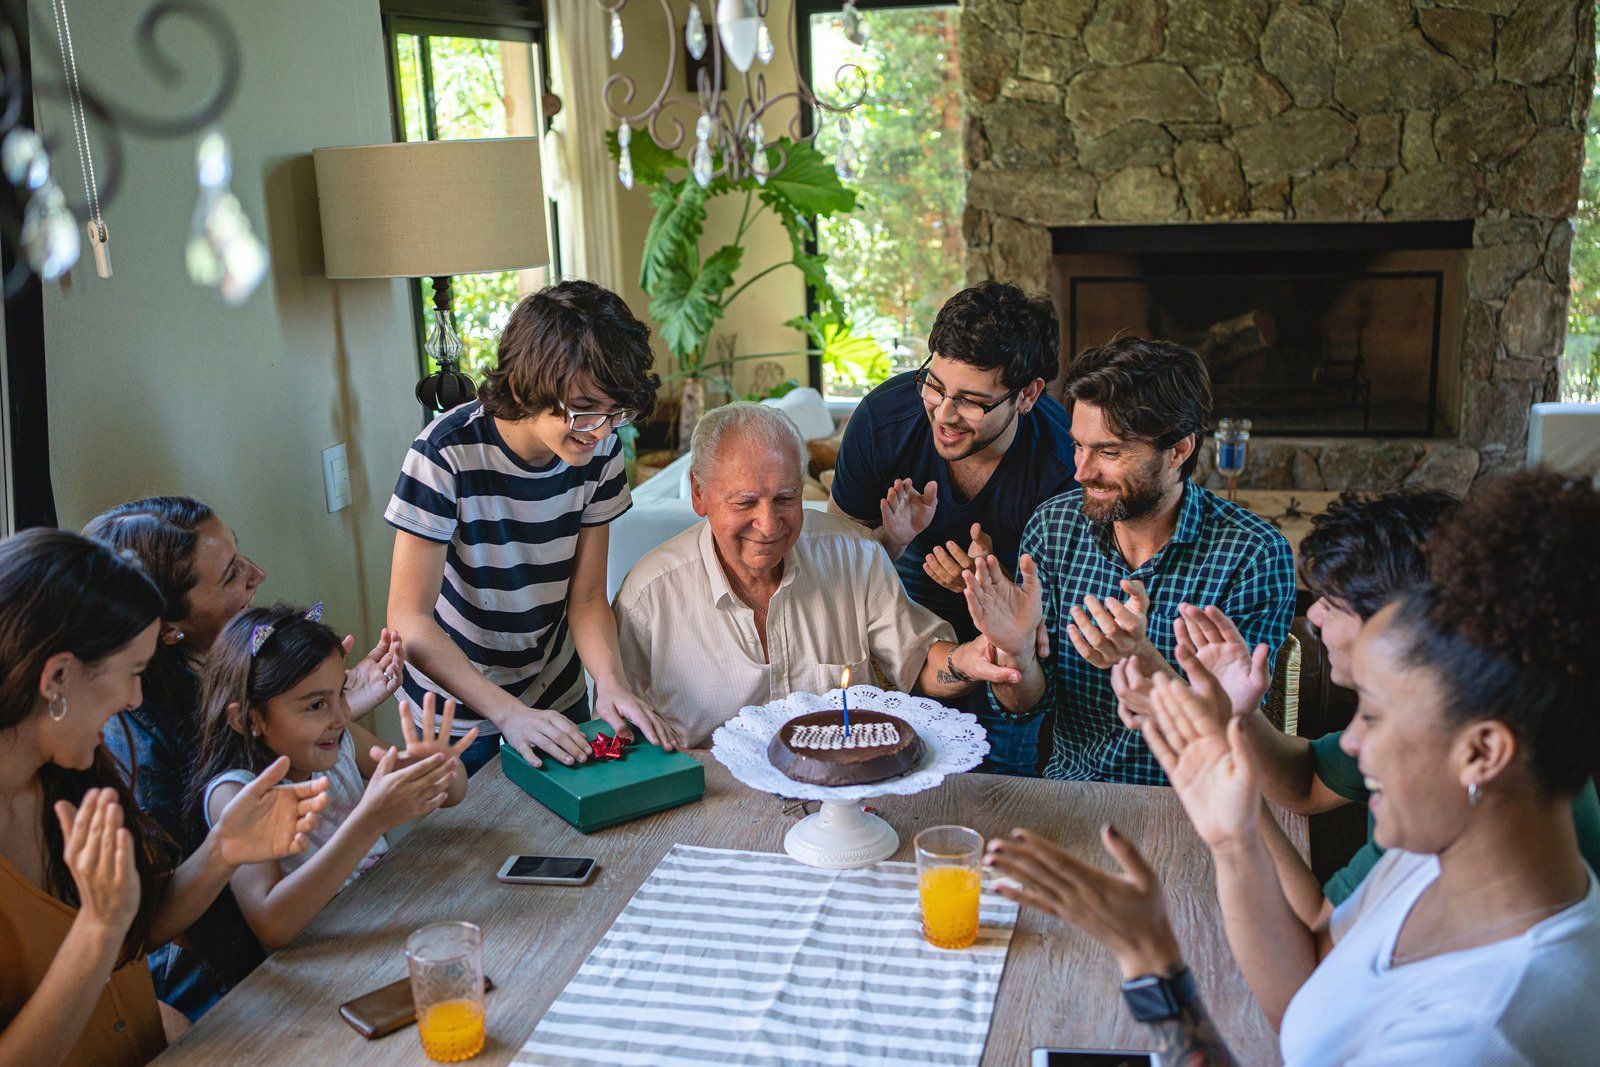 A family celebrates an elderly man's birthday, clapping as he smiles at a chocolate cake with candle